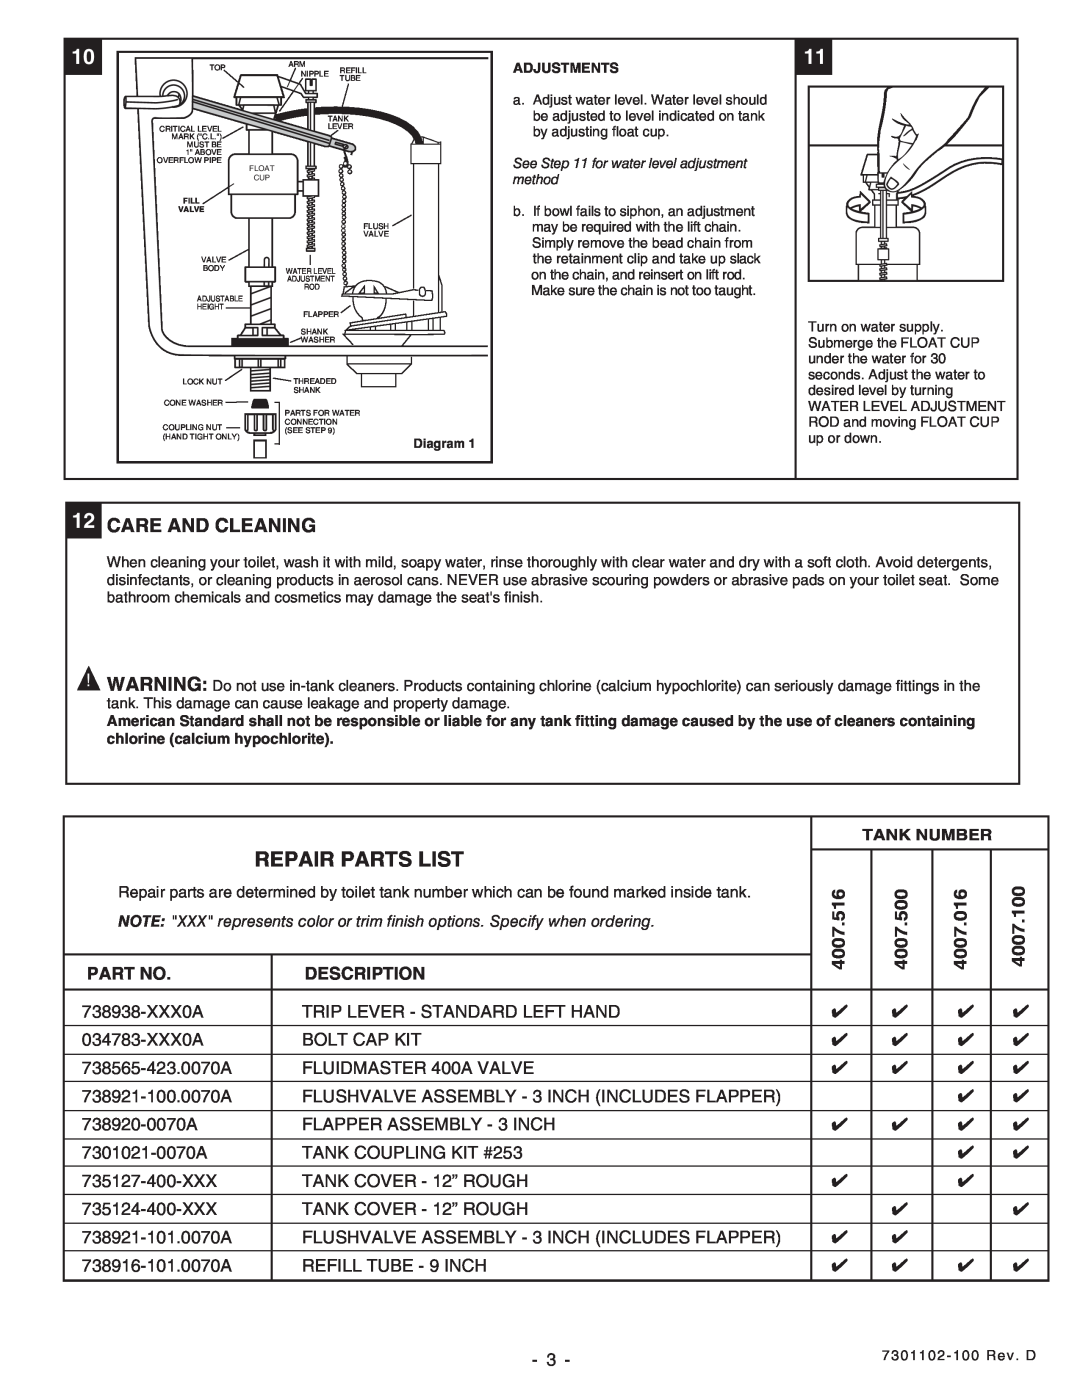 American Standard 2457, 2459 Repair Parts List, 12CARE AND CLEANING, 4007.100, 4007.516, 4007.500, 4007.016, Description 